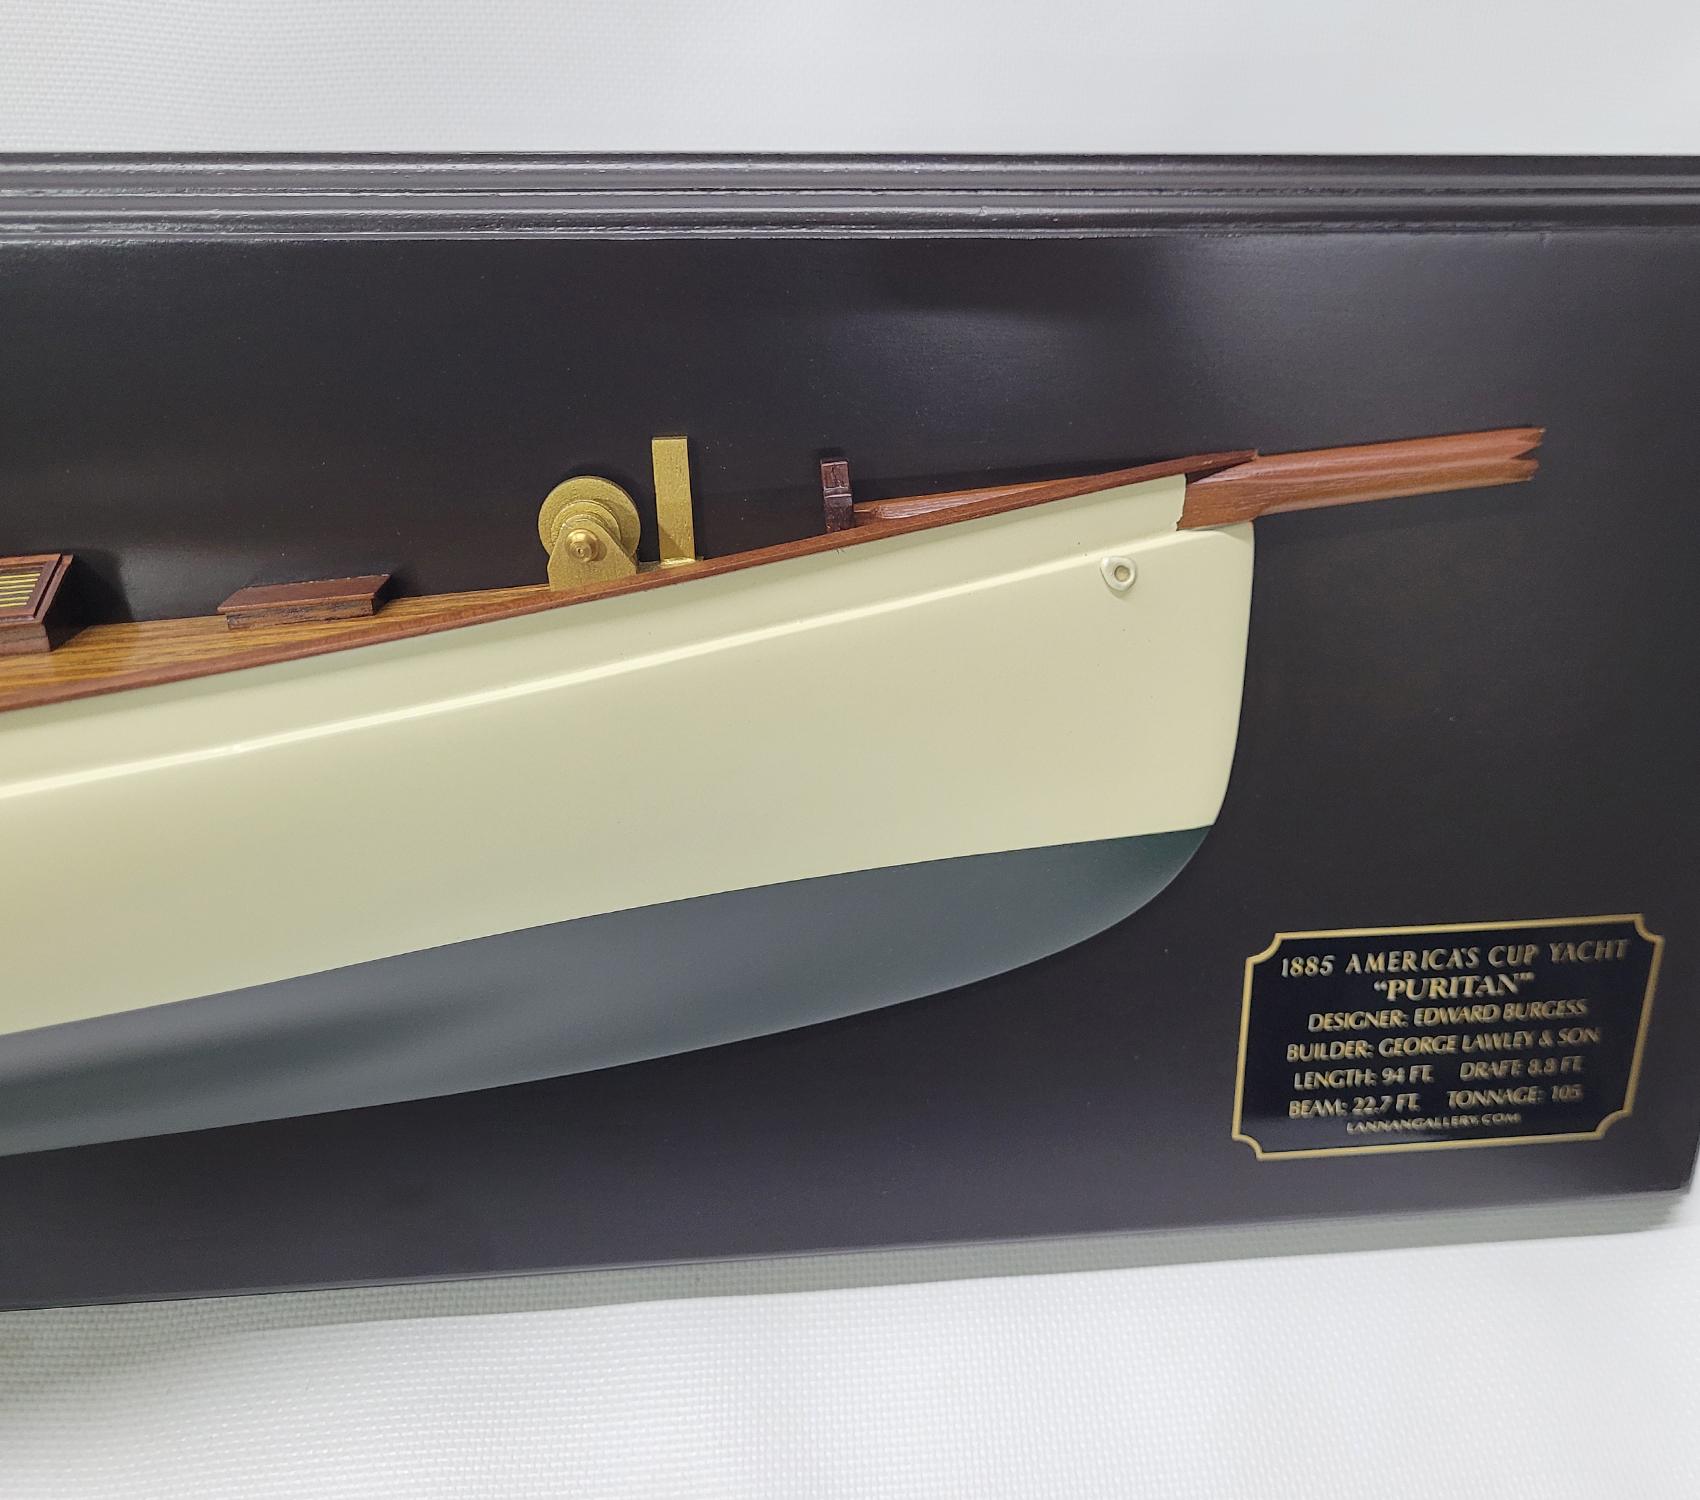 Scale Half Model Of Americas Cup Yacht 